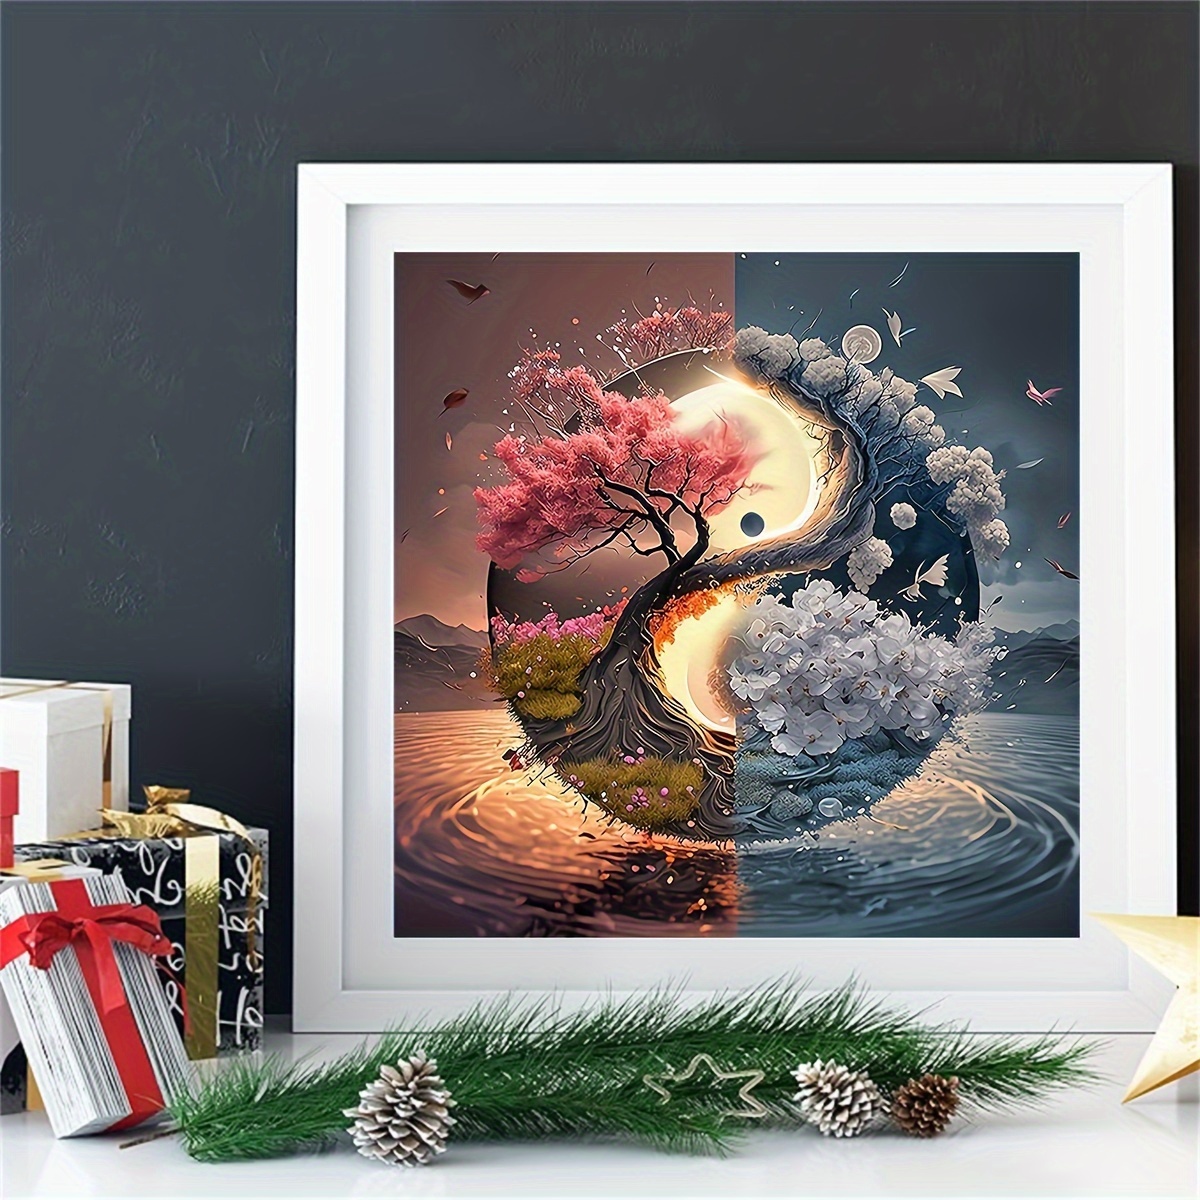 

Tai Chi Landscape Diamond Painting Tools For Adults 5d Diy Diamond Art Tools For Beginners With Round Full Diamond Gems Painting Art Decor Gifts For Home Wall Artworks, Crafts And Sewing Supplies...